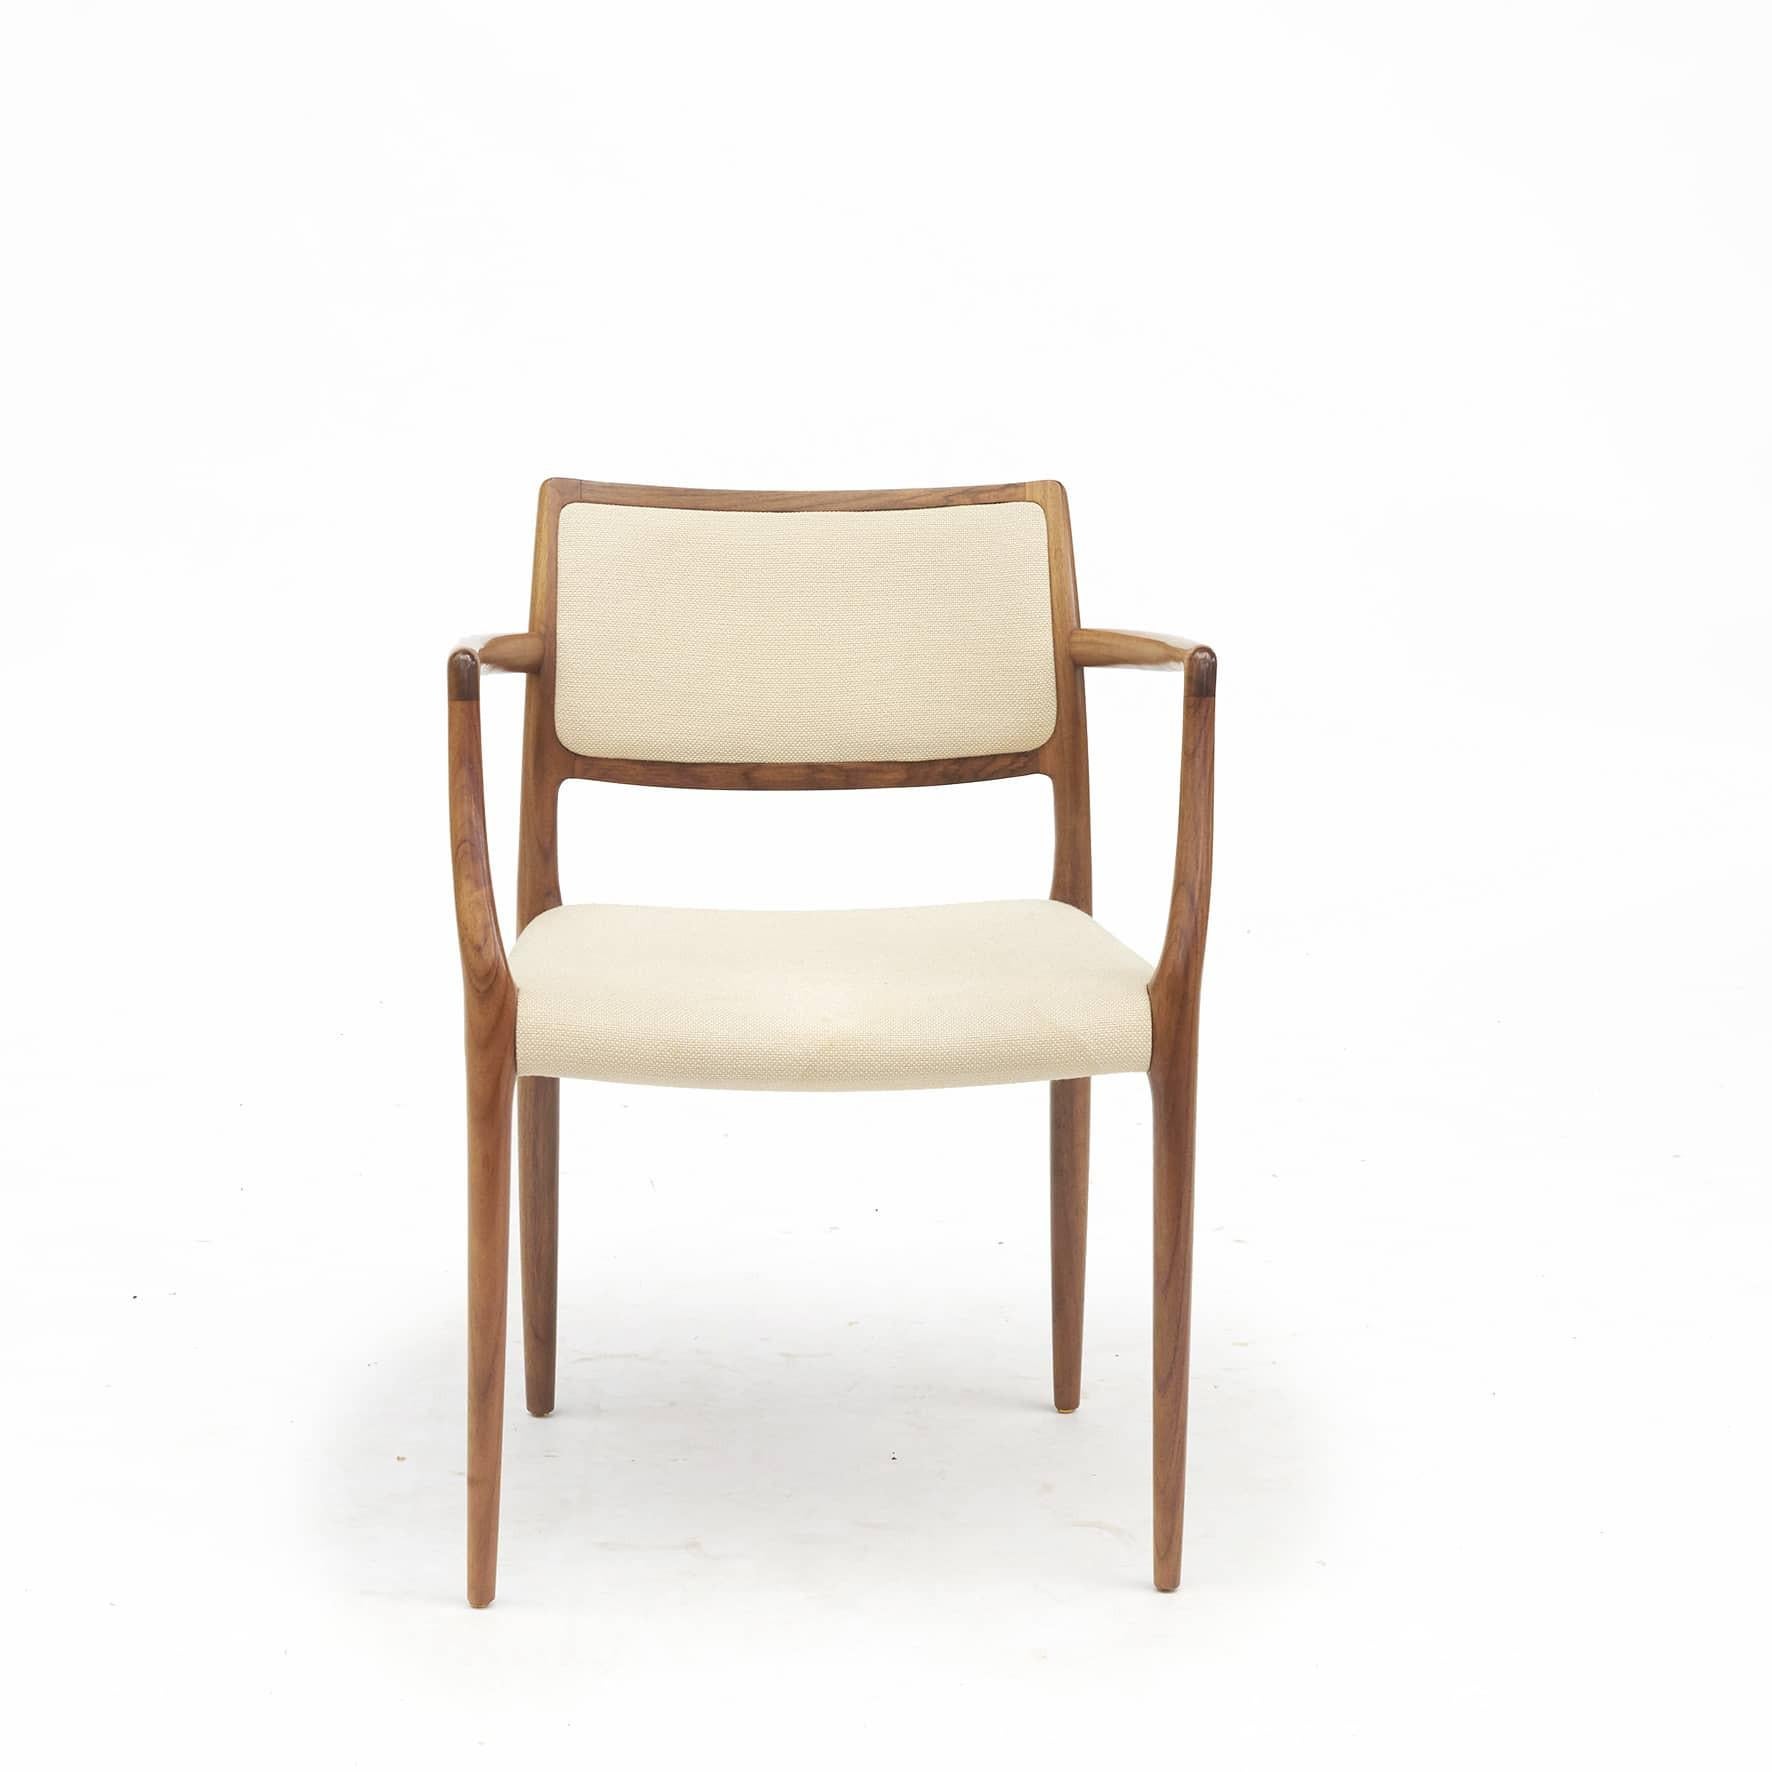 Niels Otto Møller 1920-1982.
Set of 6 Danish dining chairs designed by Niels O. Møller in the 1960s.
Model No. 65 in rosewood manufactured by J.L. Møllers in Denmark.
A Danish design icon showing best craftsmanship and beautiful sculptural